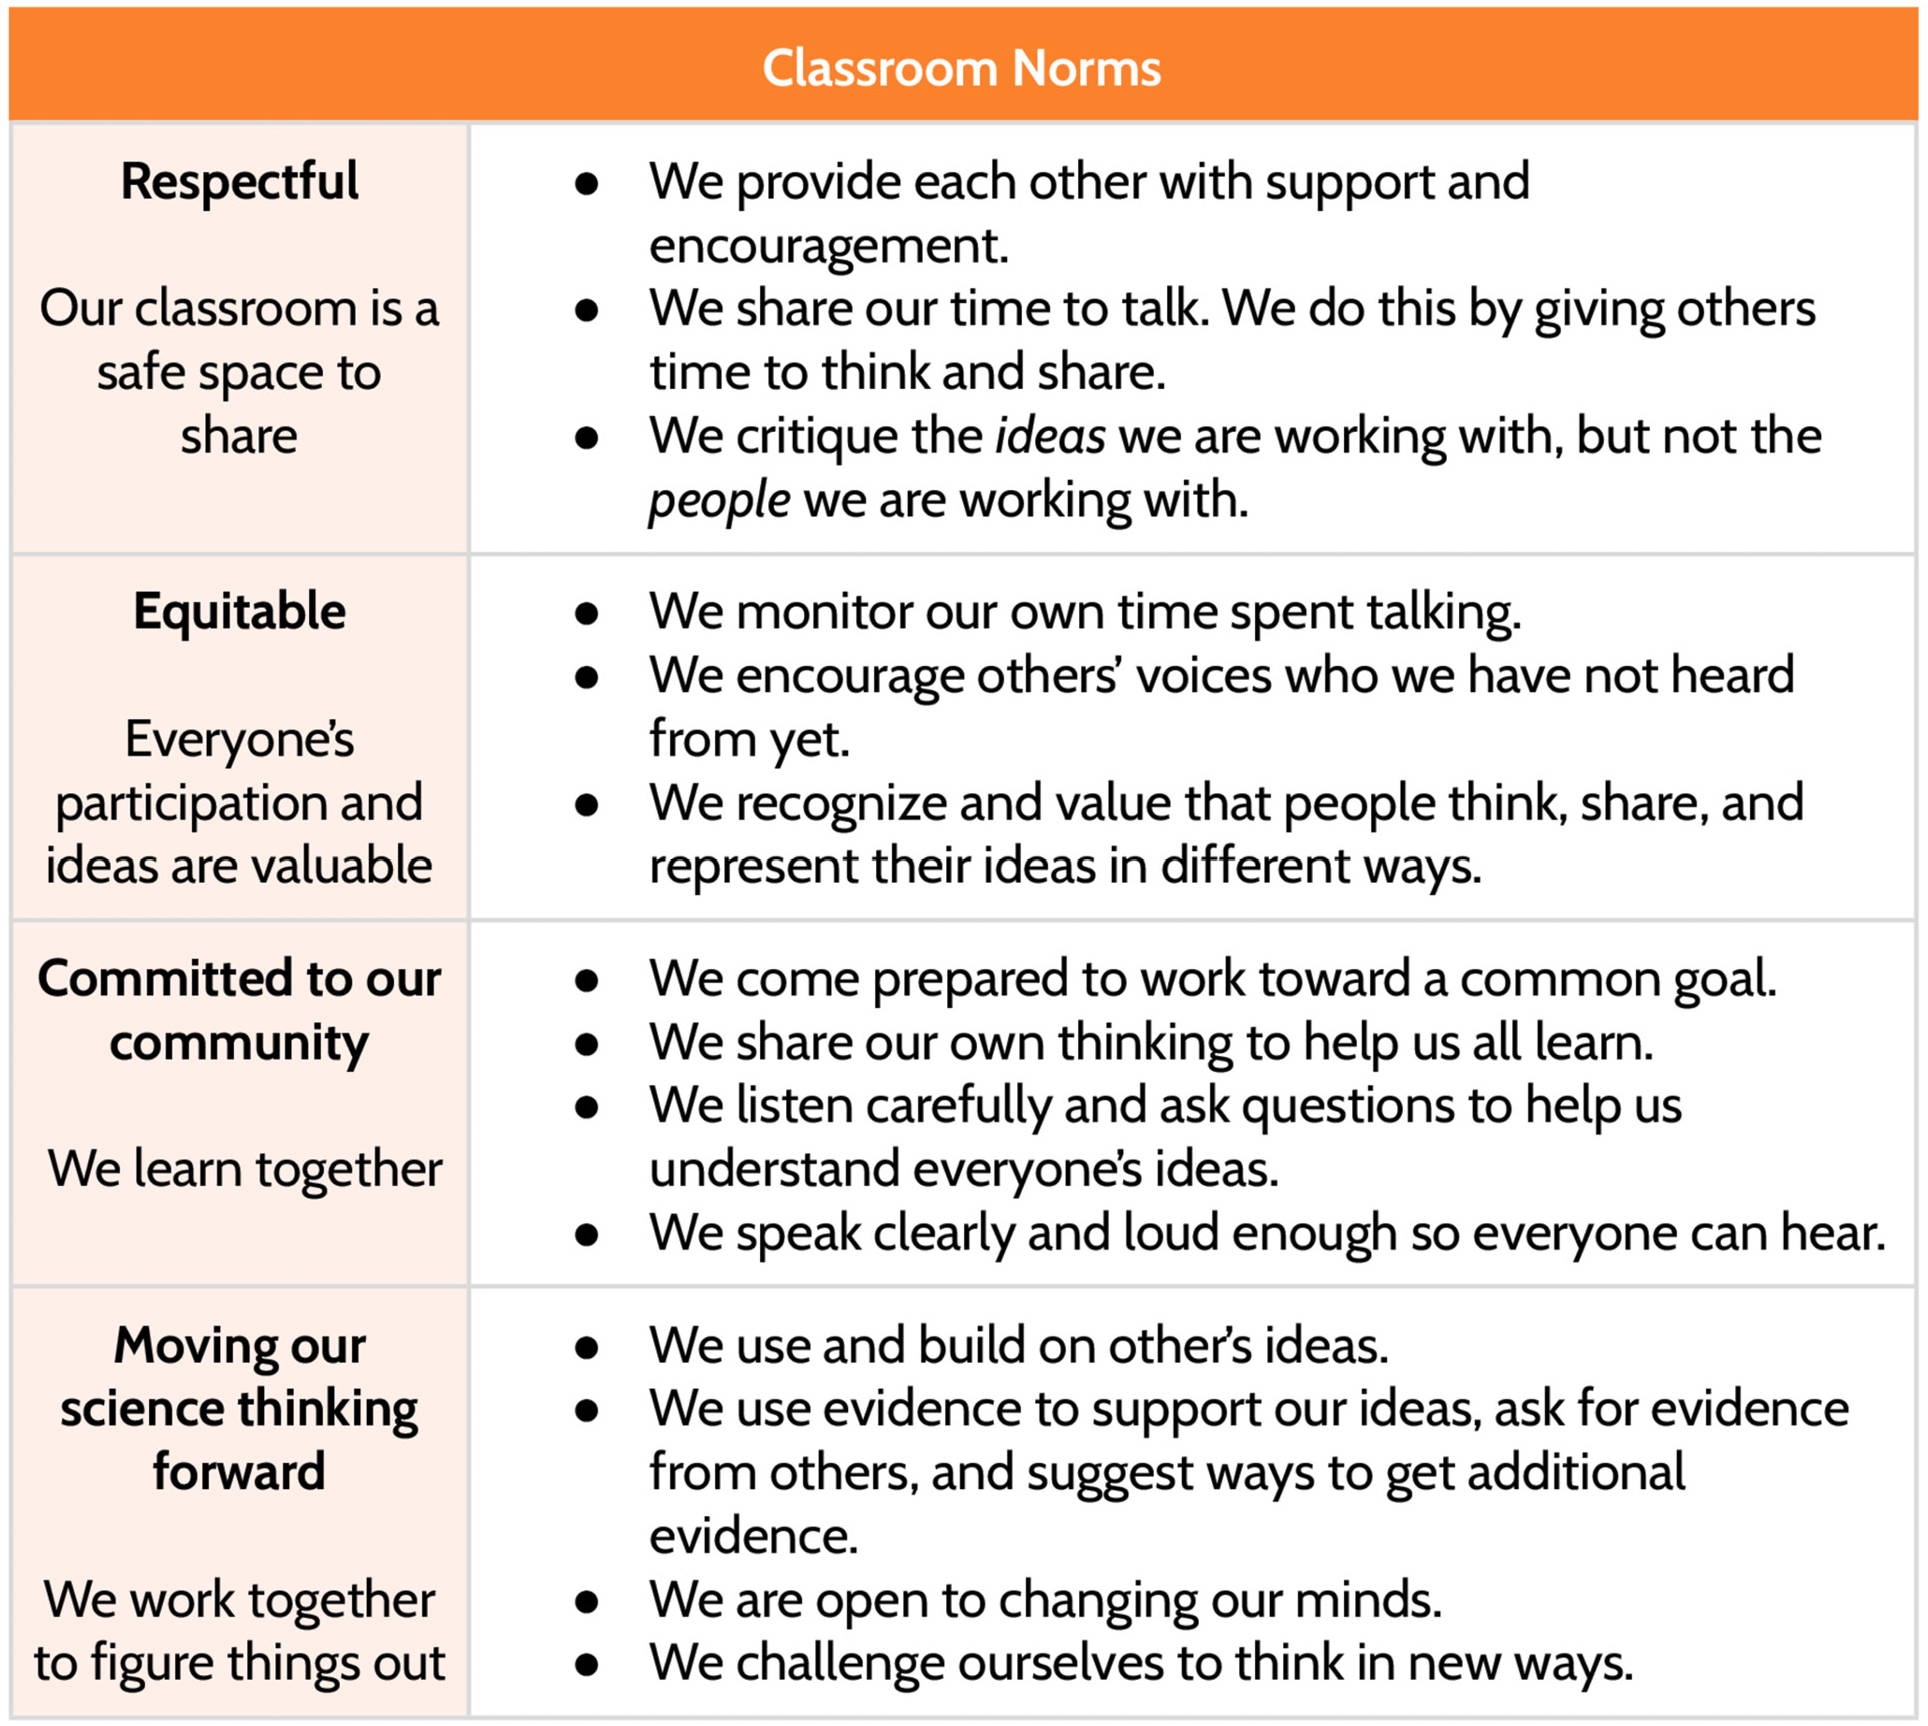 Sample classroom norms (OpenSciEd).